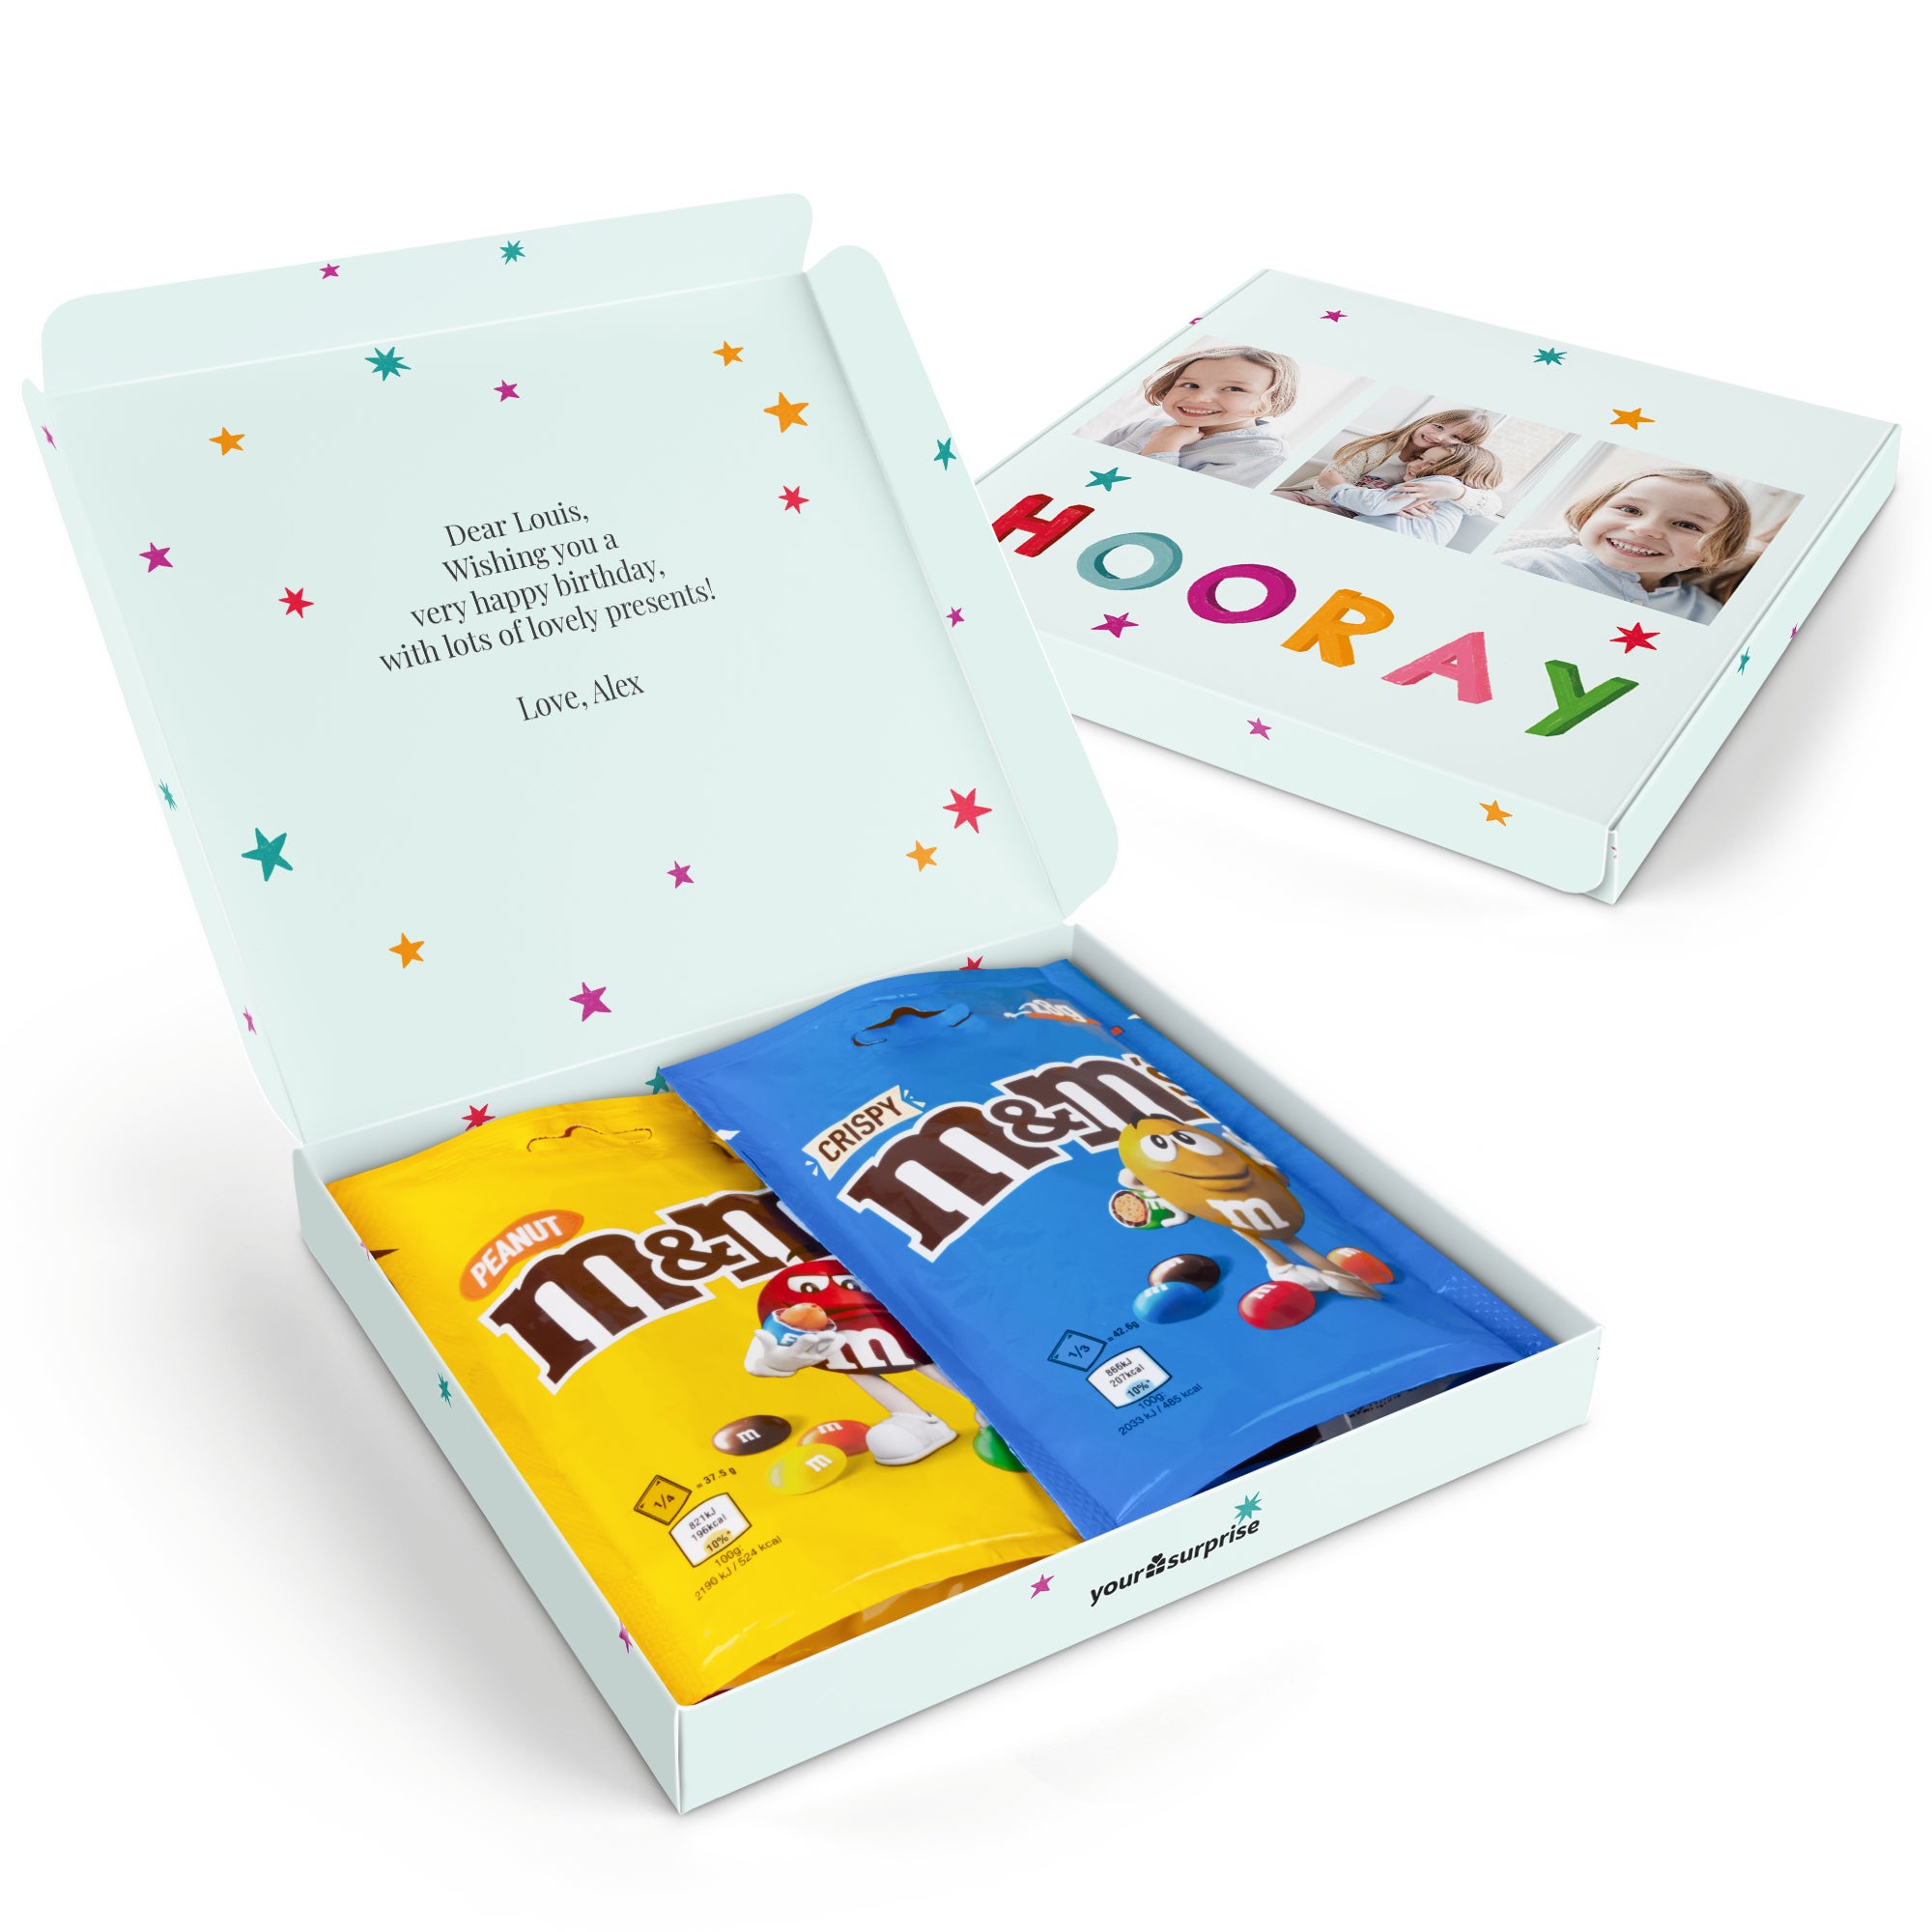 Personalised M&M's gift box - General - 2 bags